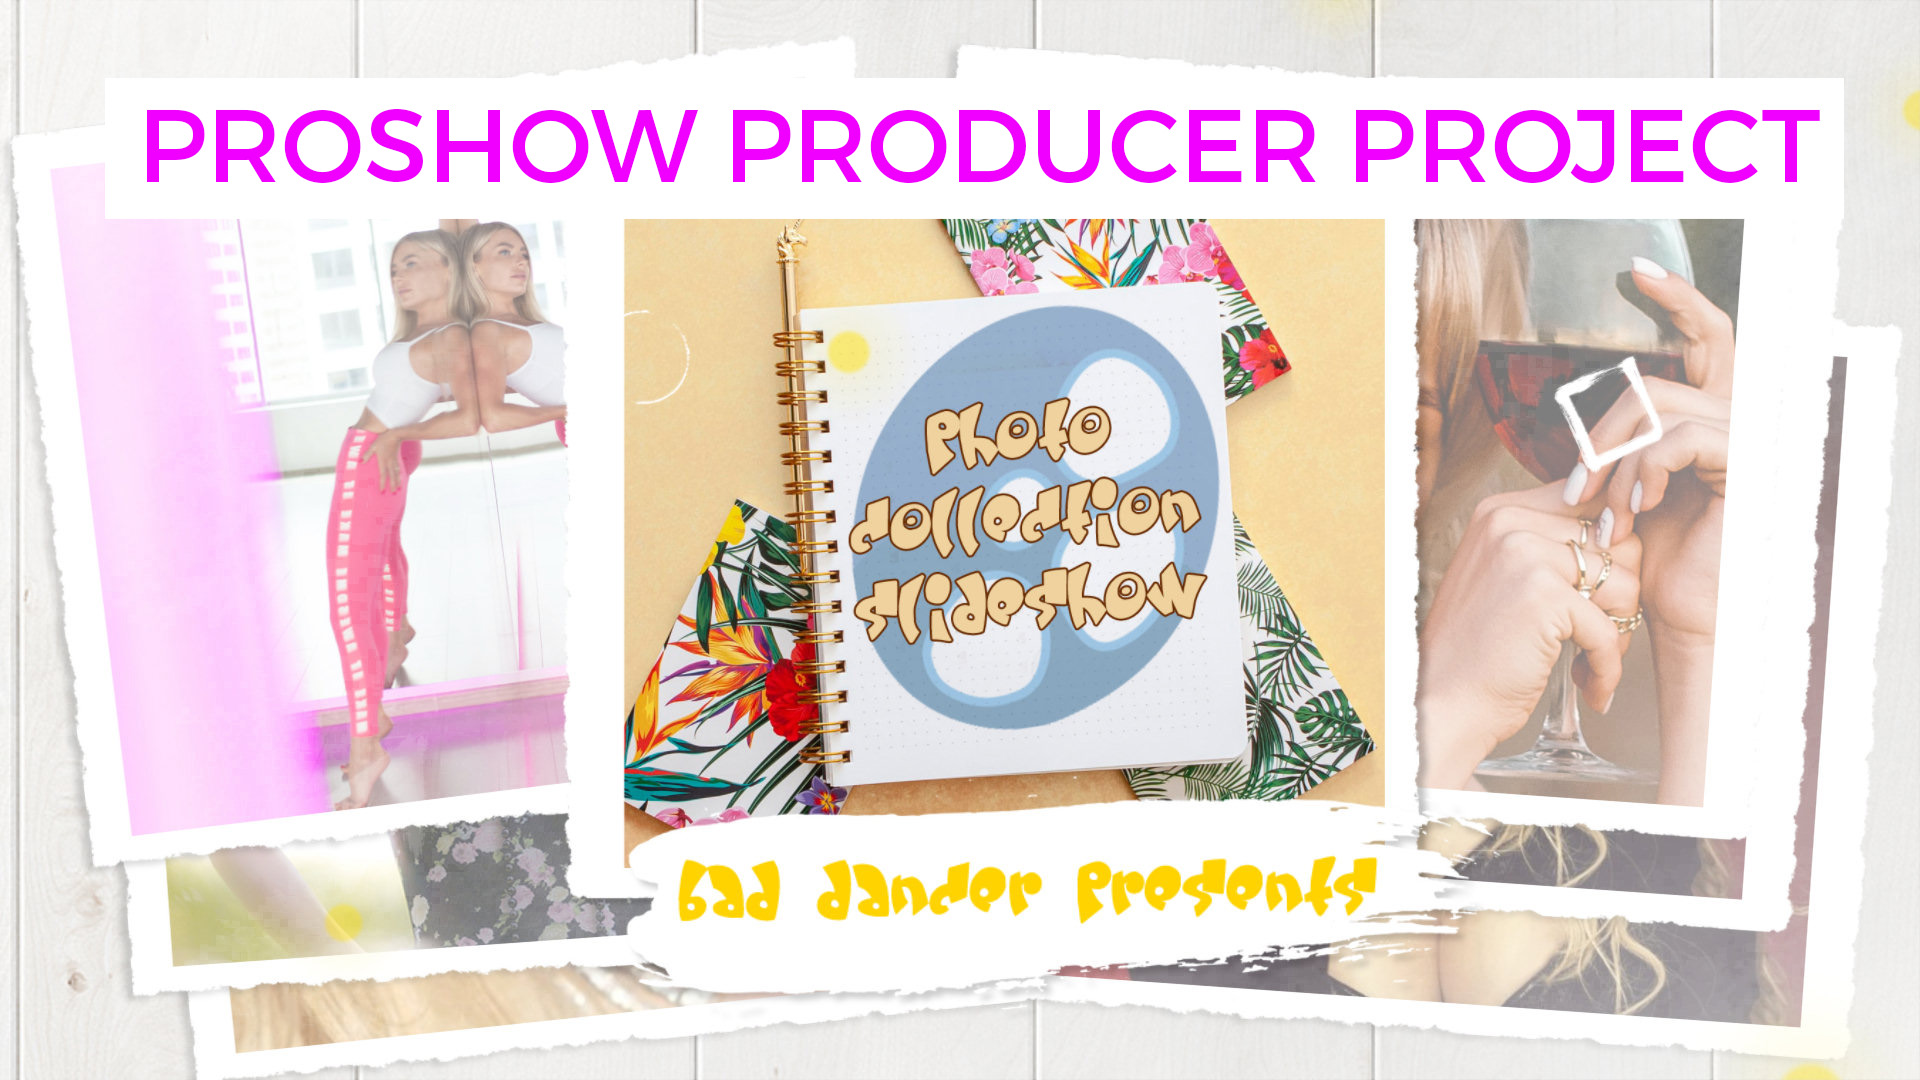 Free Proshow Producer project Photo Collection Slideshow ID 28052022.mp4